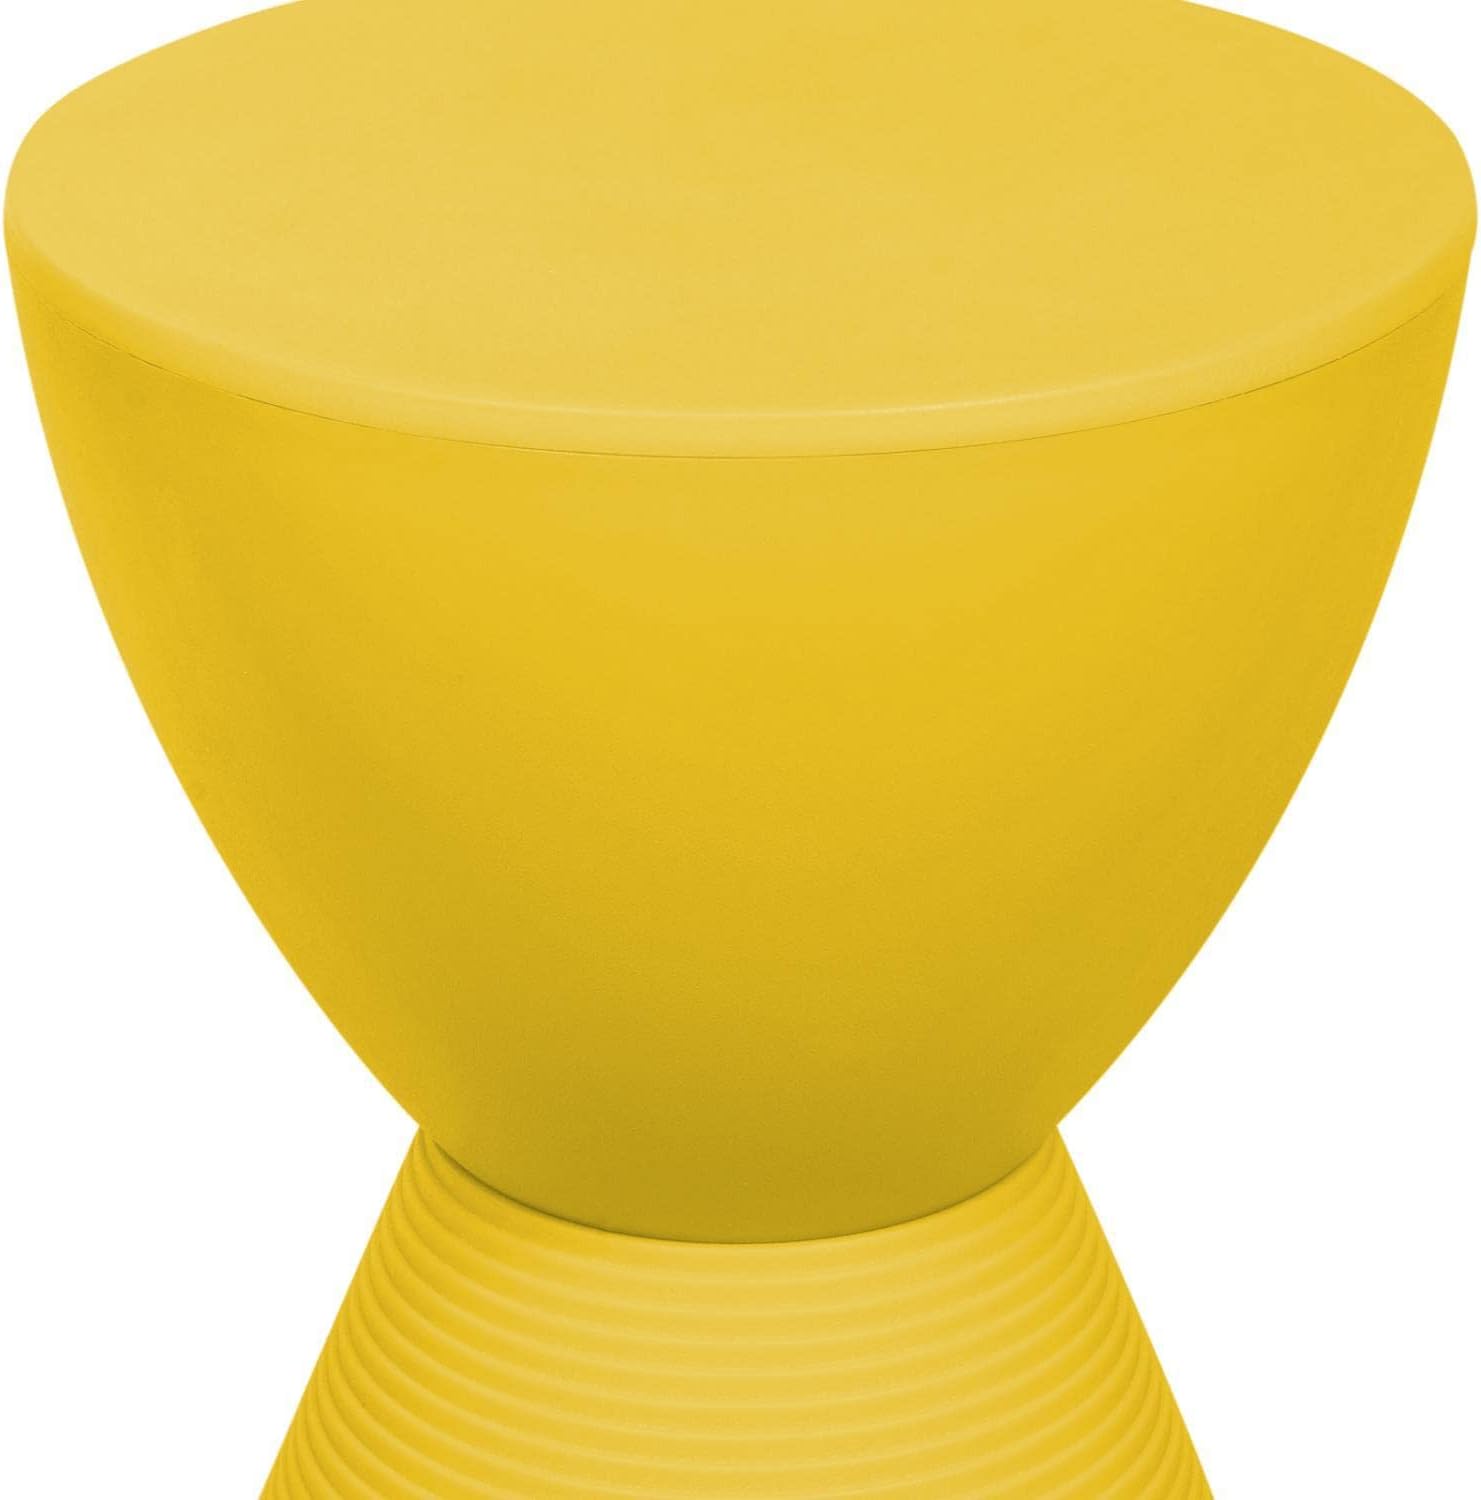 LeisureMod Boyd Modern Accent Side Table End Table Indoor and Outdoor Use, 16.75" H x 11.75" W x 11.75" D (Yellow)